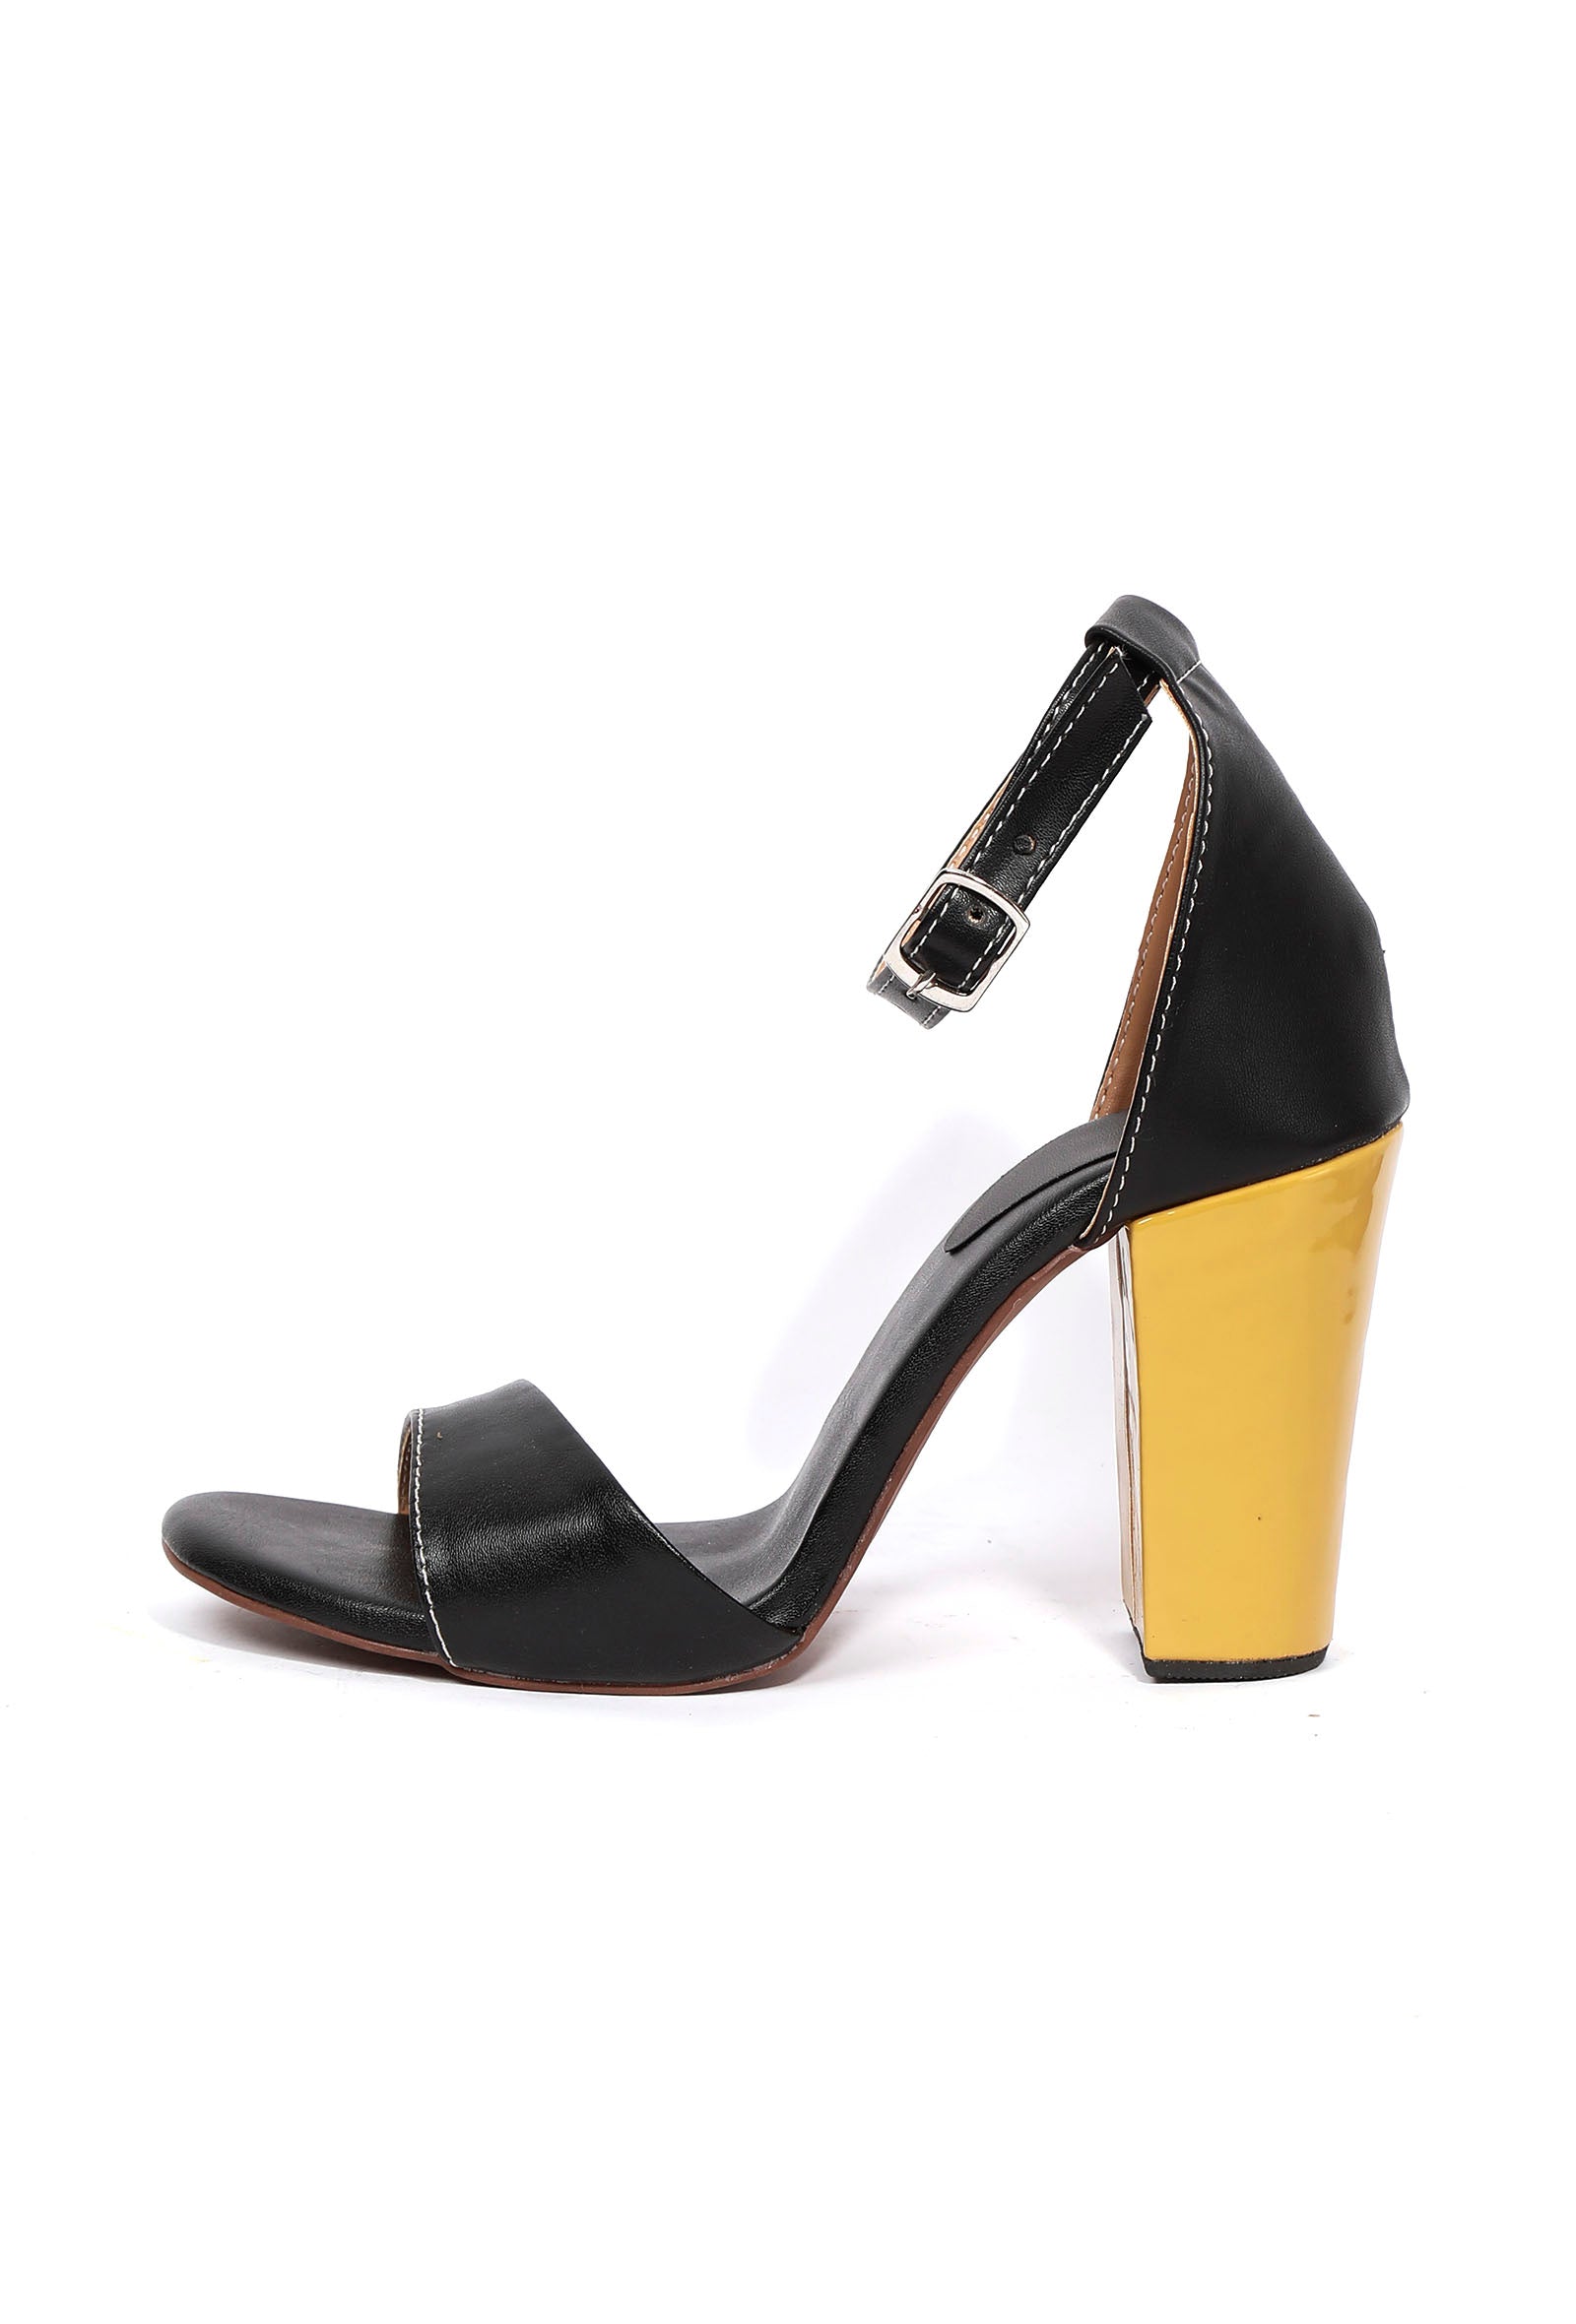 Pastel Black with Braided Golden Strap Cushion Padded Heels